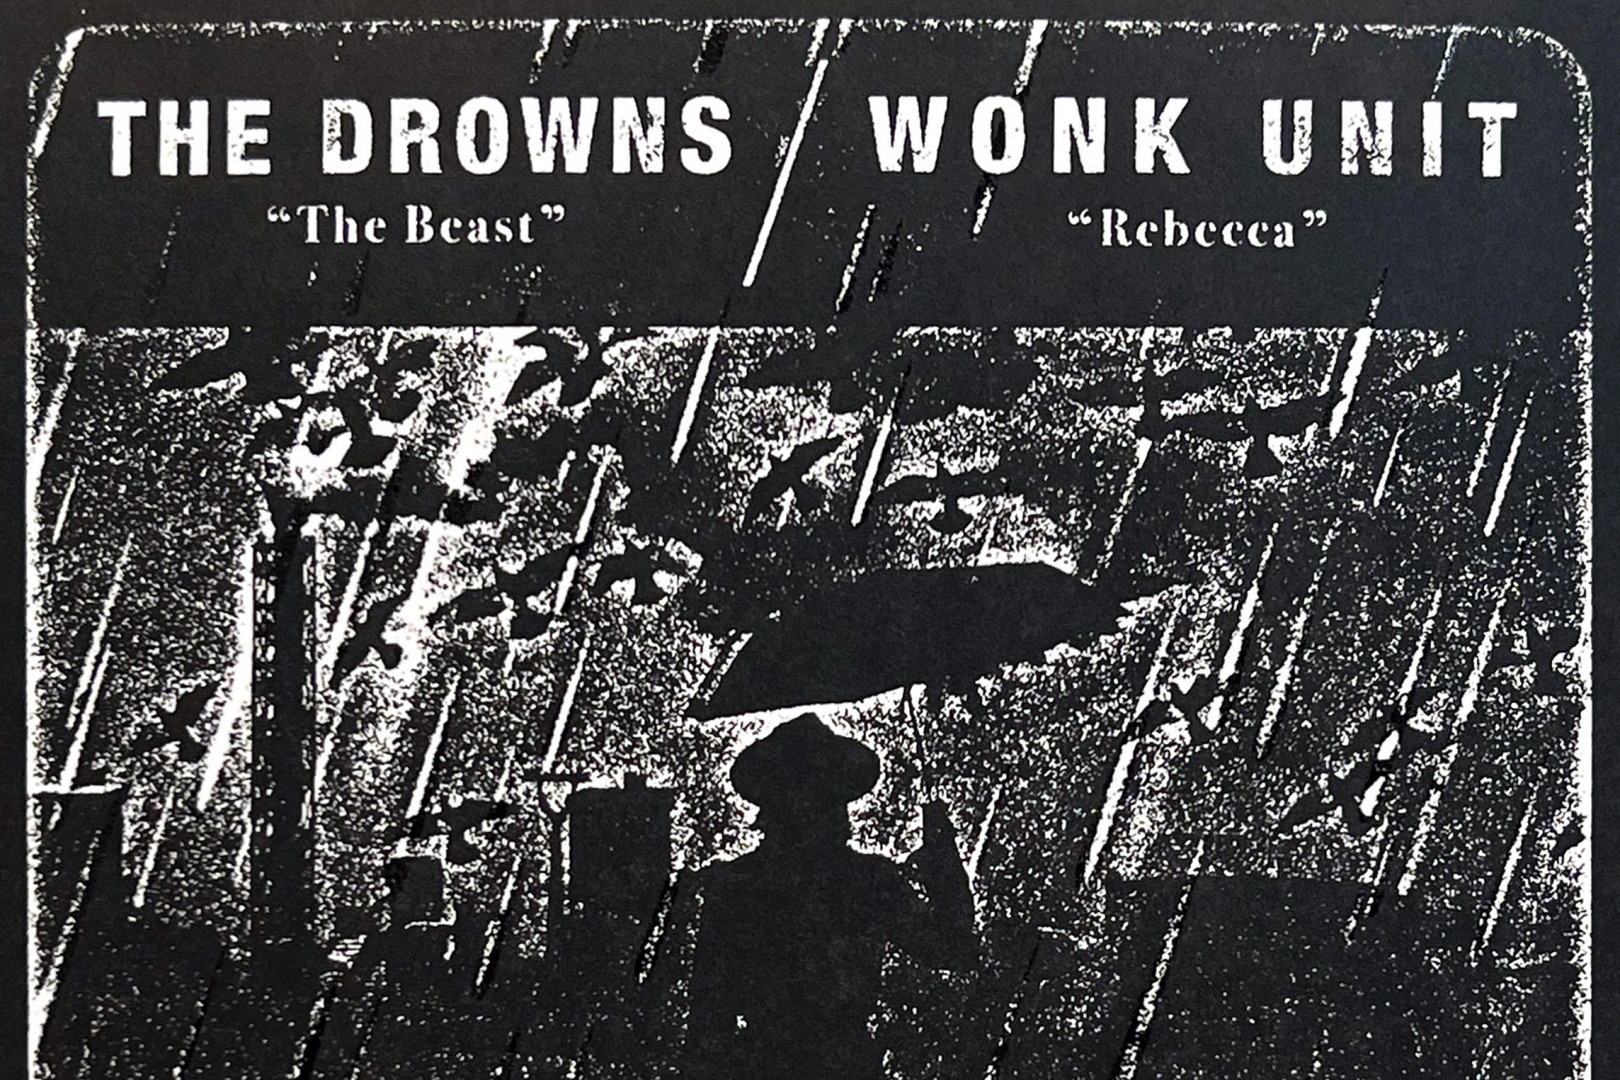 Check out the new split by The Drowns and Wonk Unit!